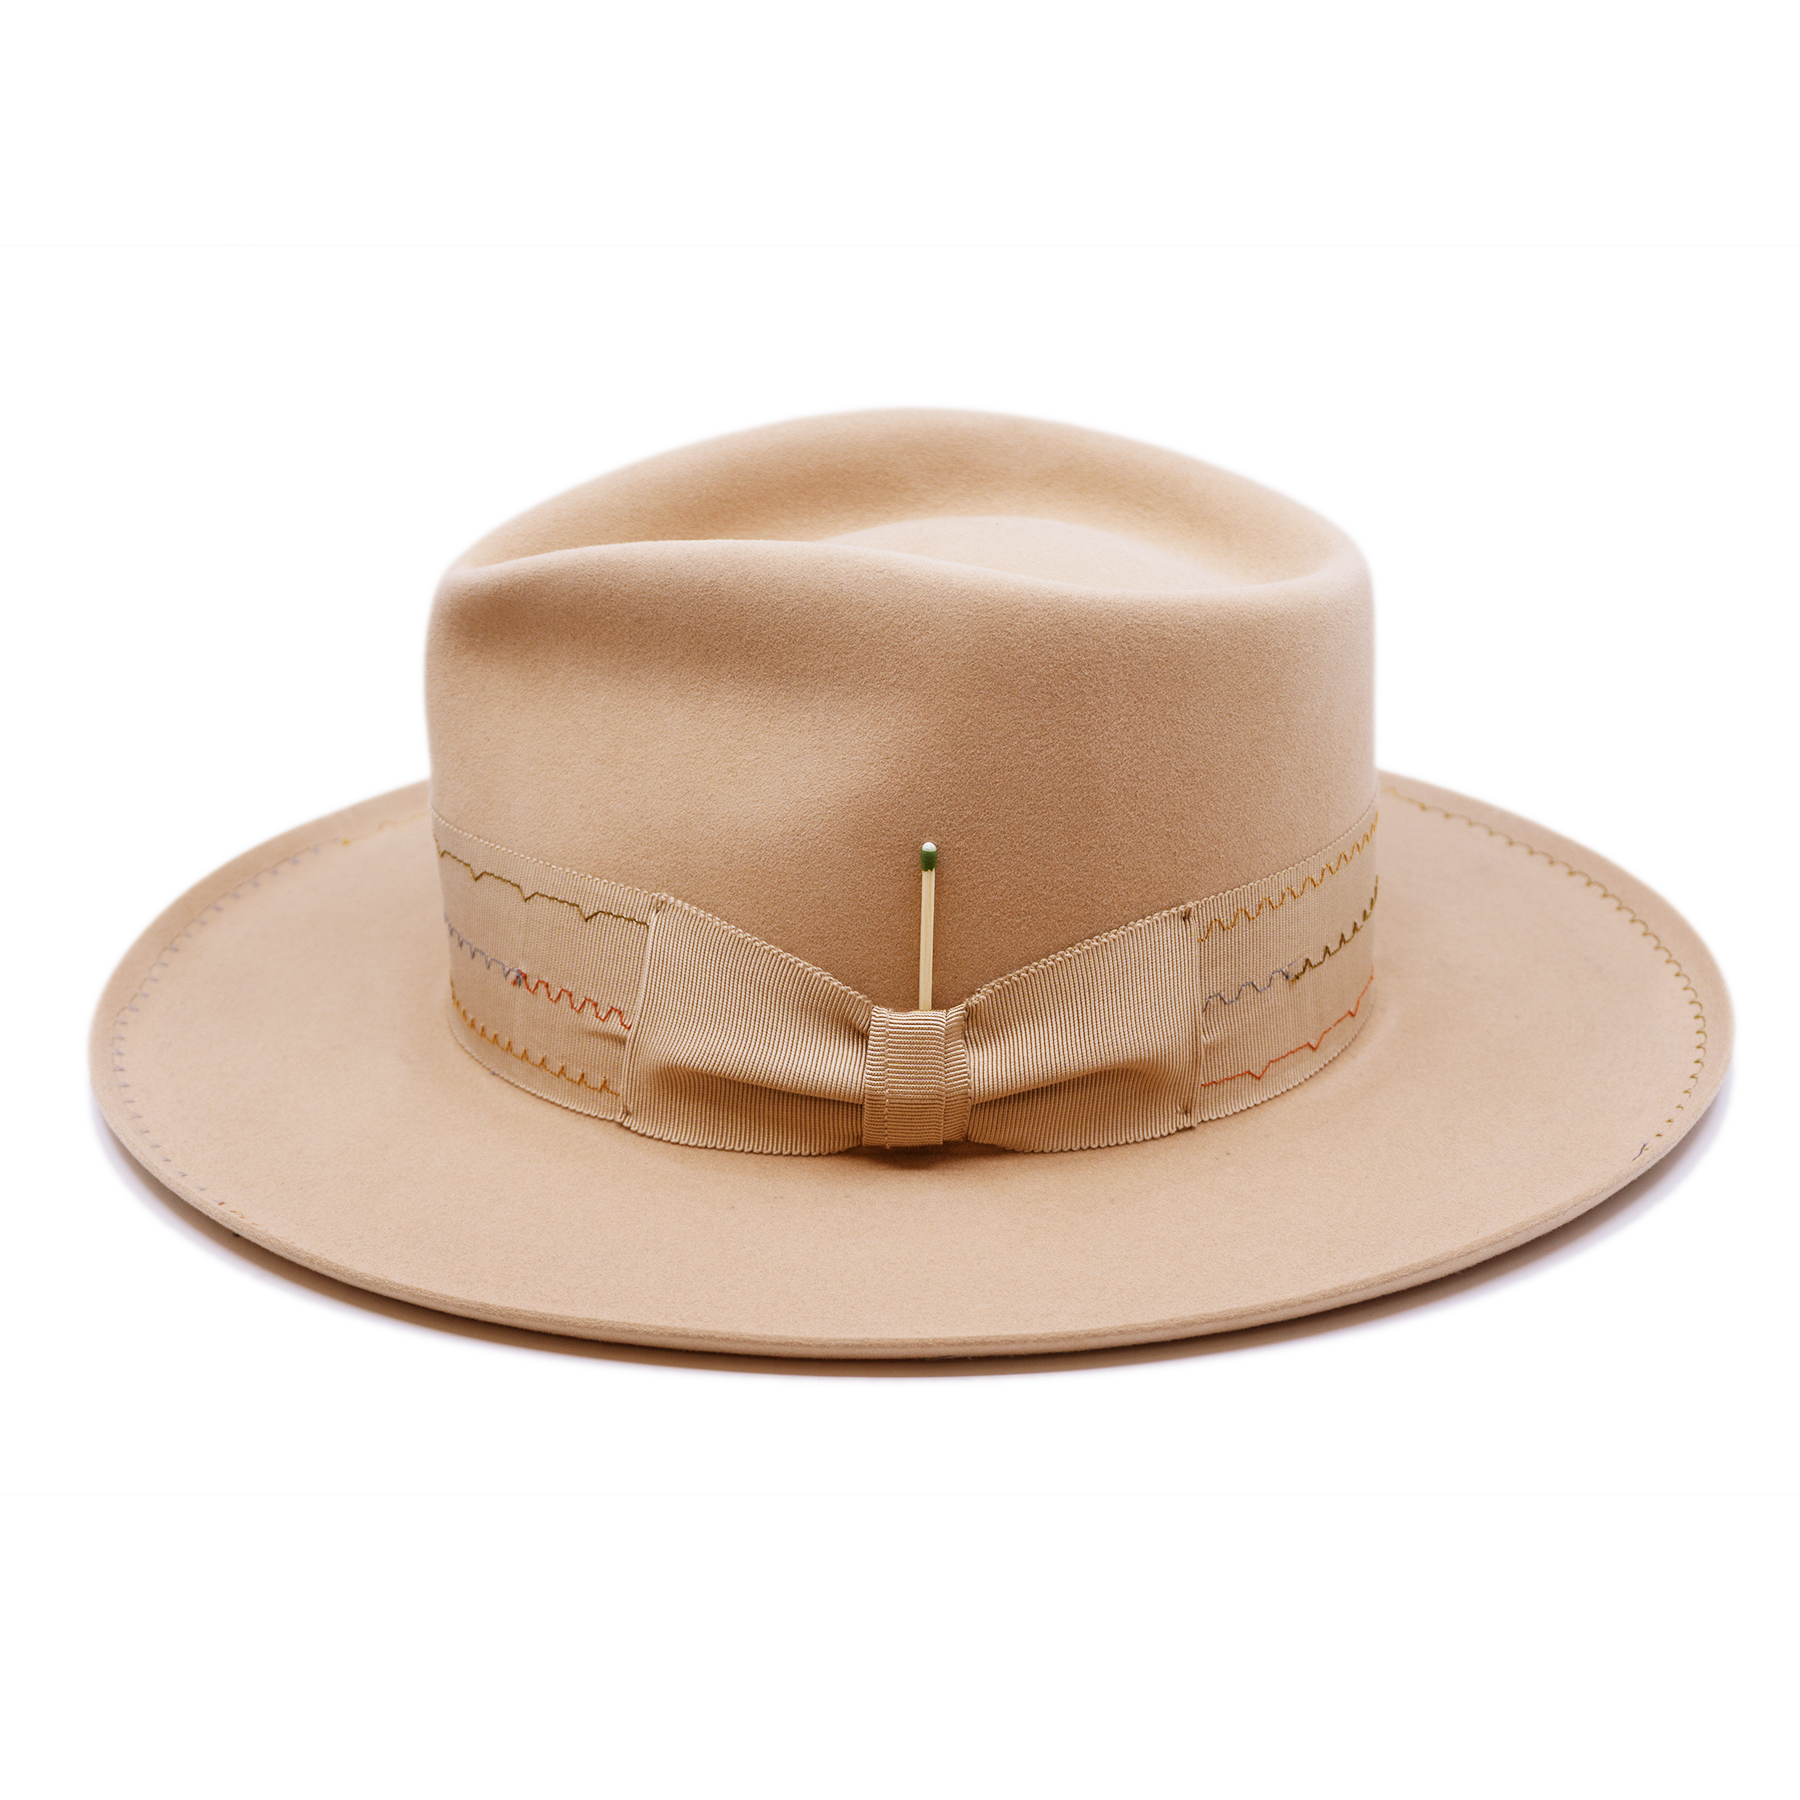 100% felt hat in Nude  Western Weight   2” tonal grosgrain with zig zag multi color stitching on band   2" tonal grosgrain bow  Multi colored zig zag stitching on brim   Pencil curled brim  Made in USA